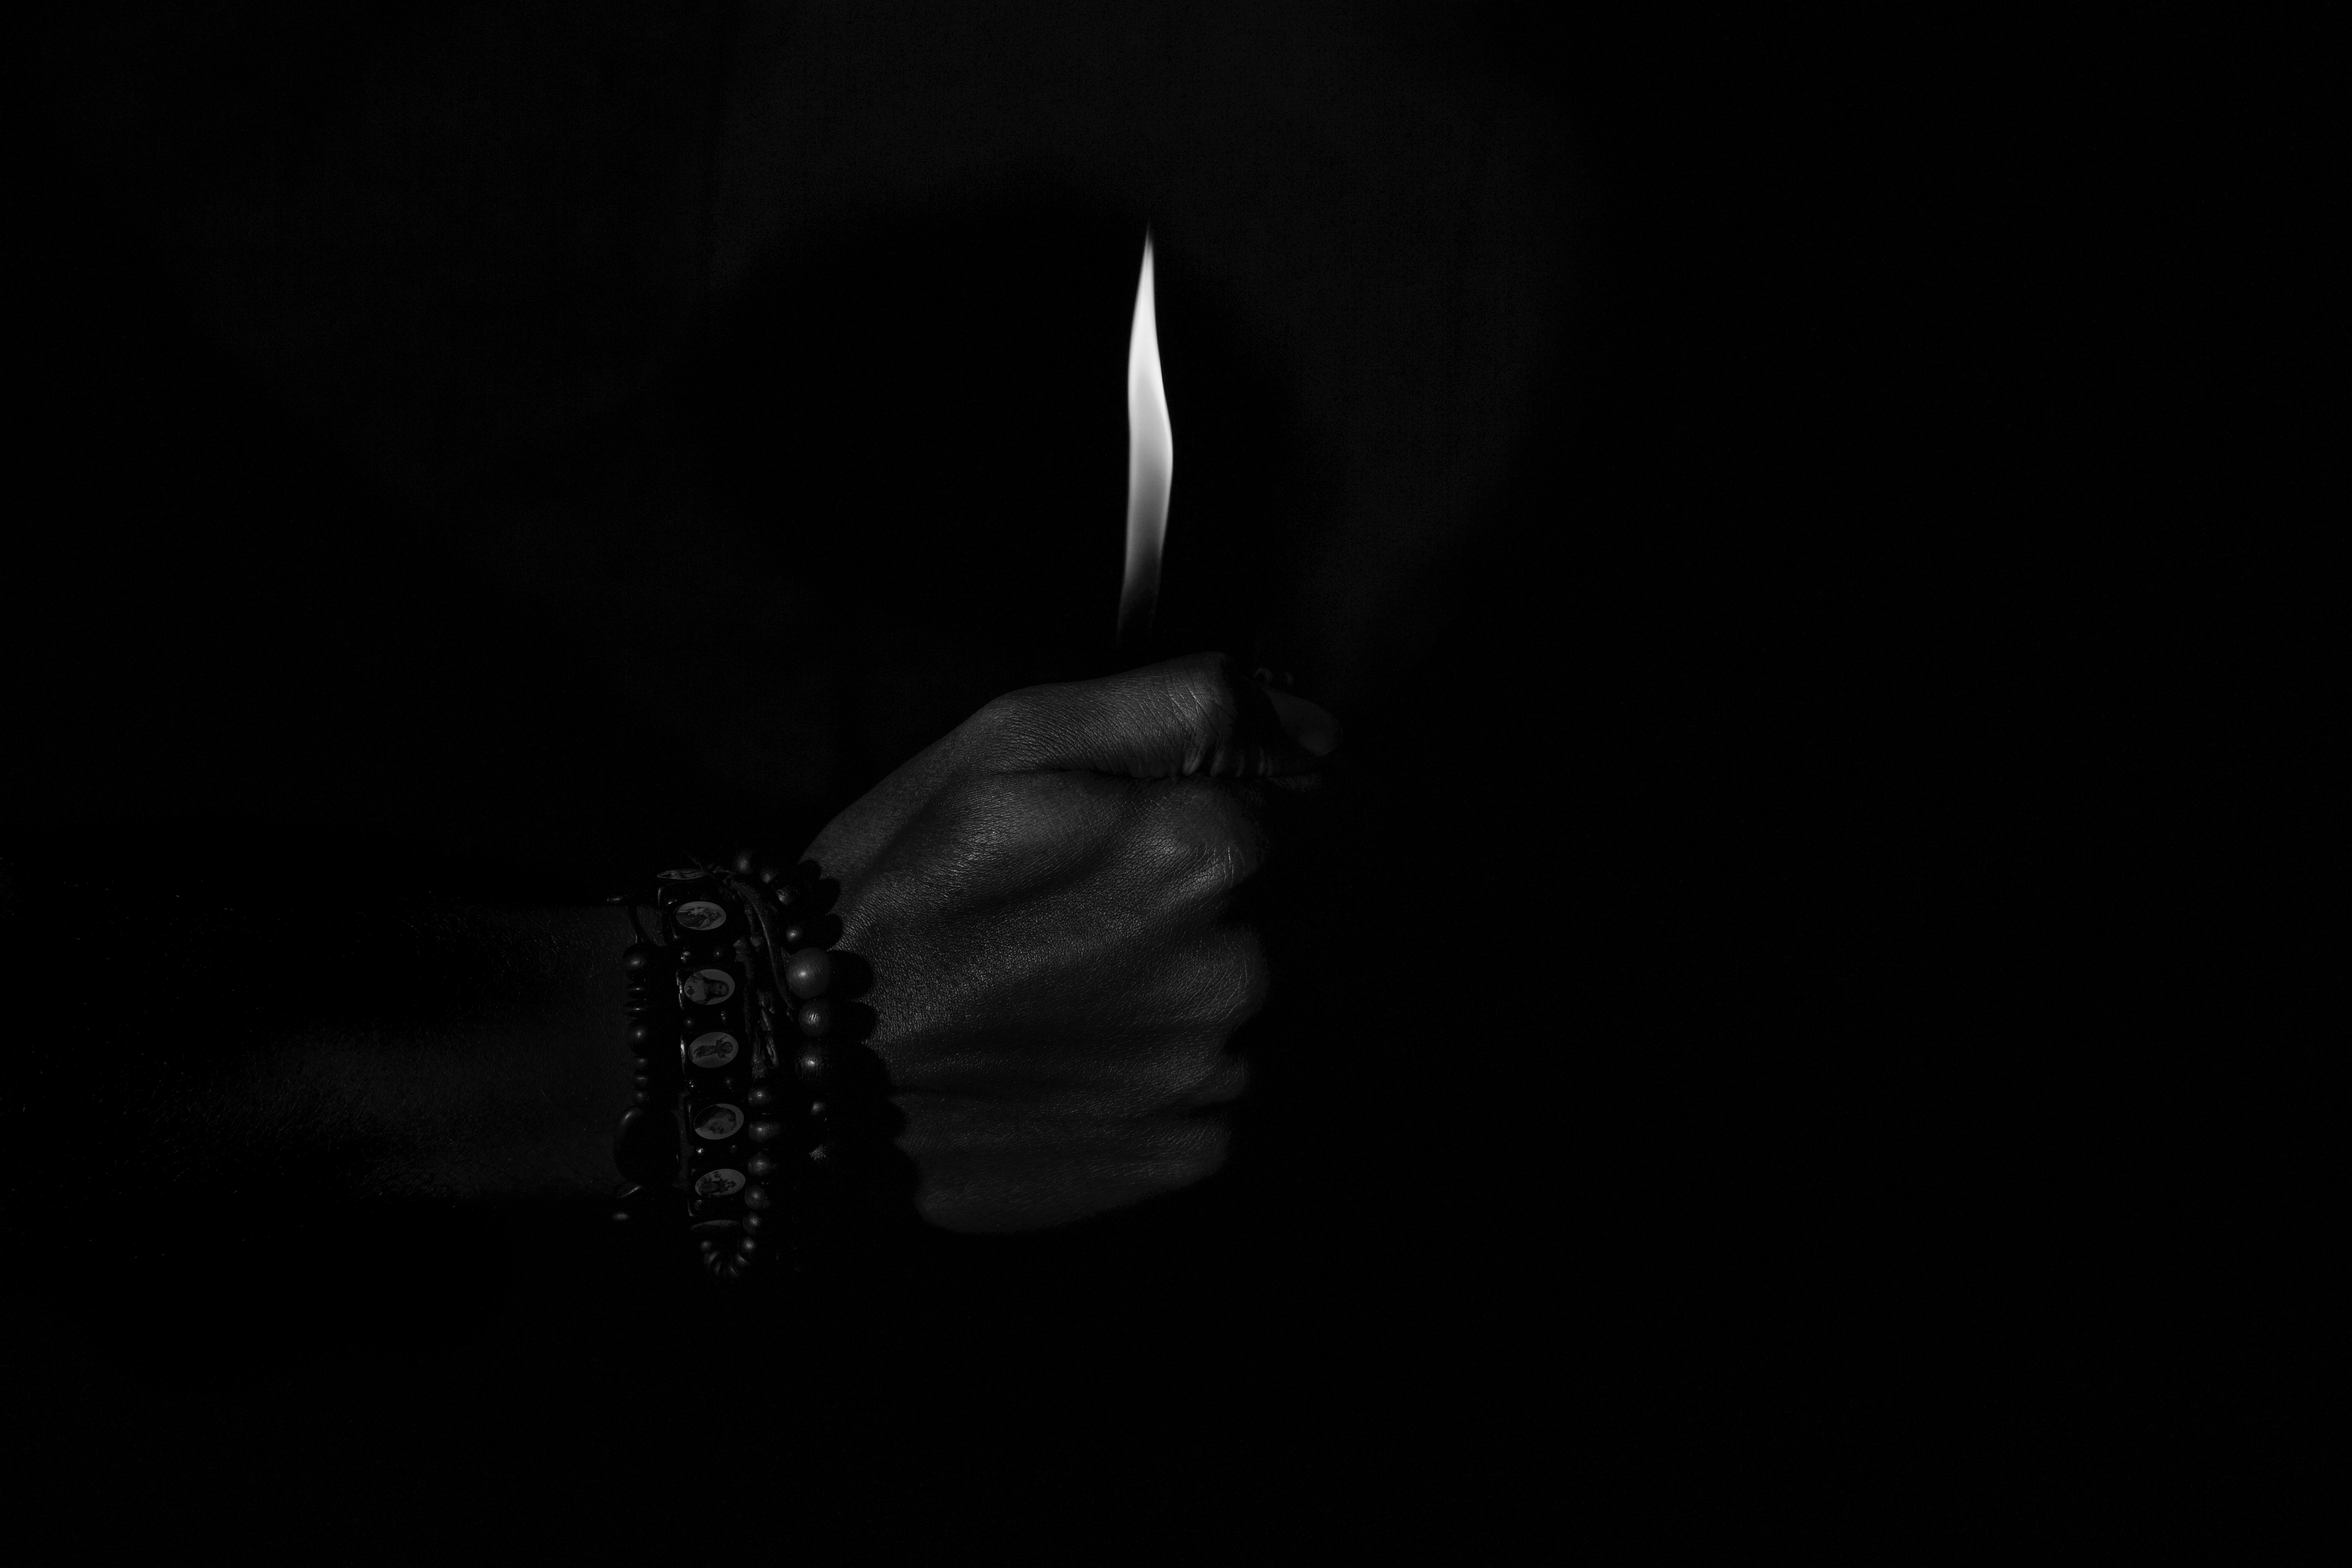 chb, hands, black, bw, candle